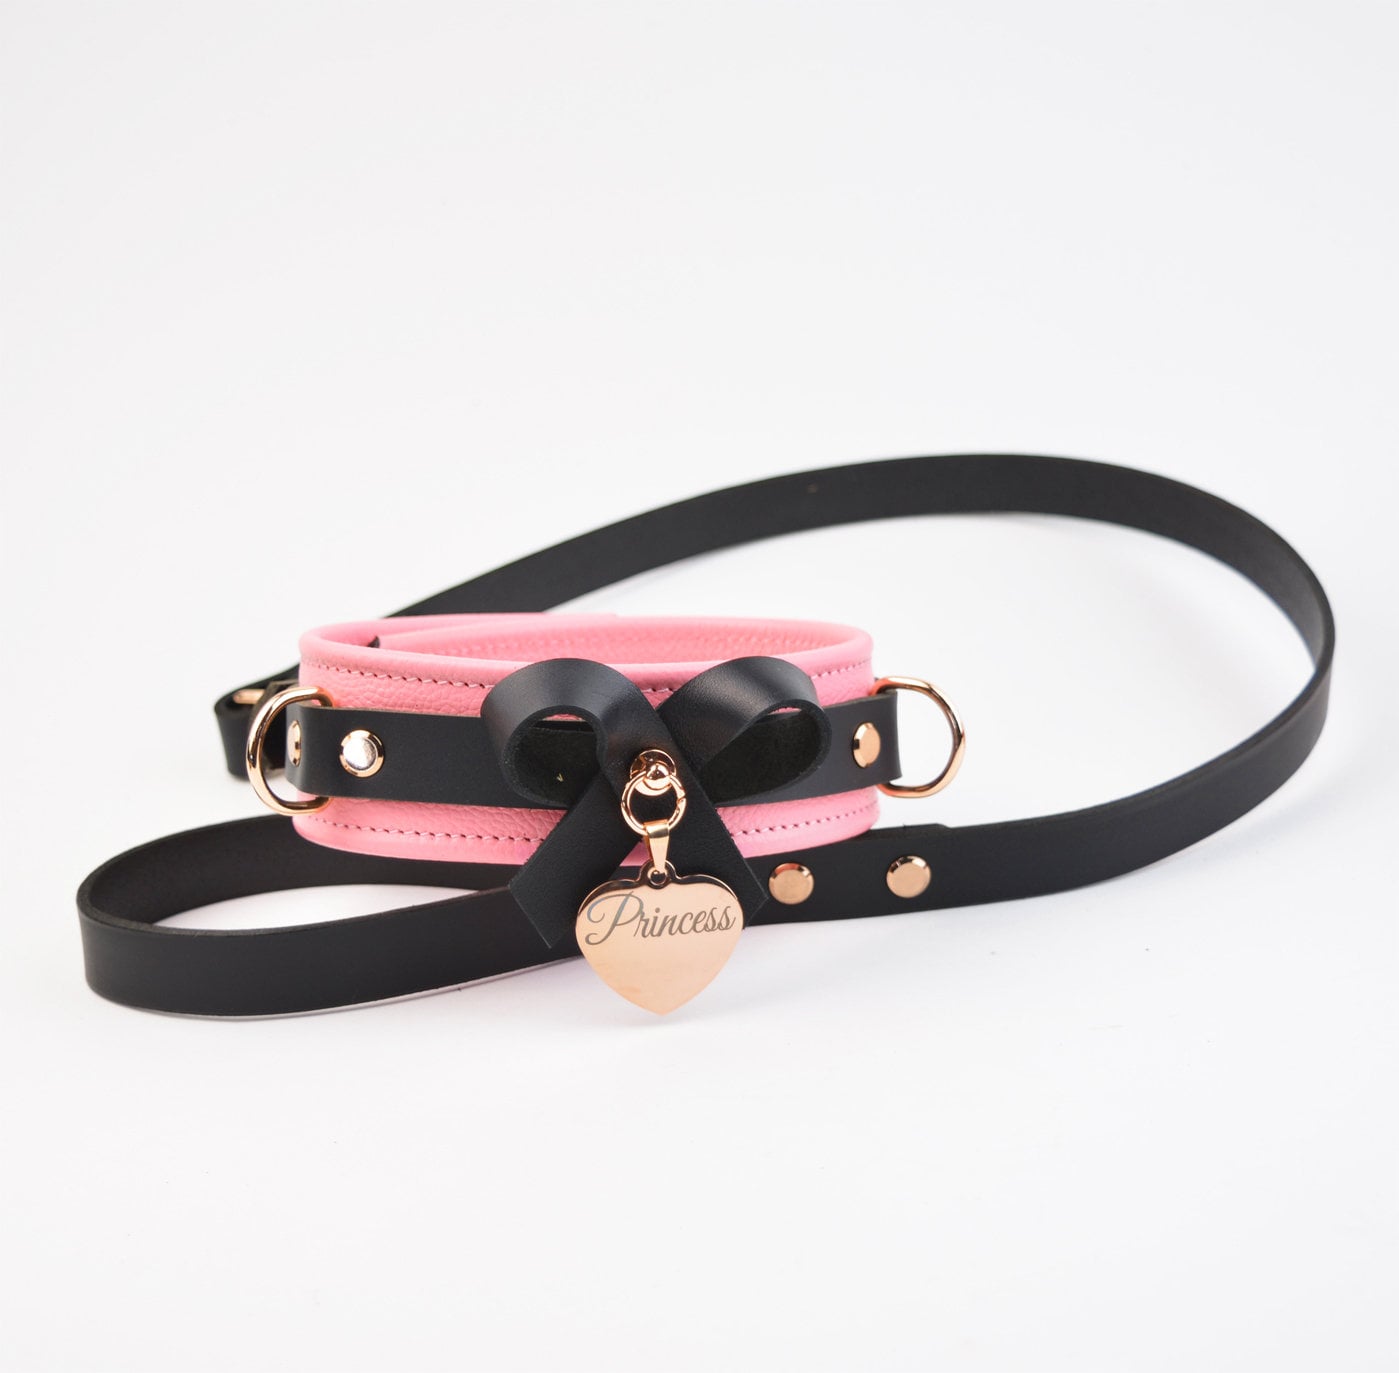 LIMITED EDT. Princess Pink Leather & Rose Gold Restraint Set - Wrist/Ankle Cuffs, Custom Engraved Bow Collar, Leash, Cross Connector photo